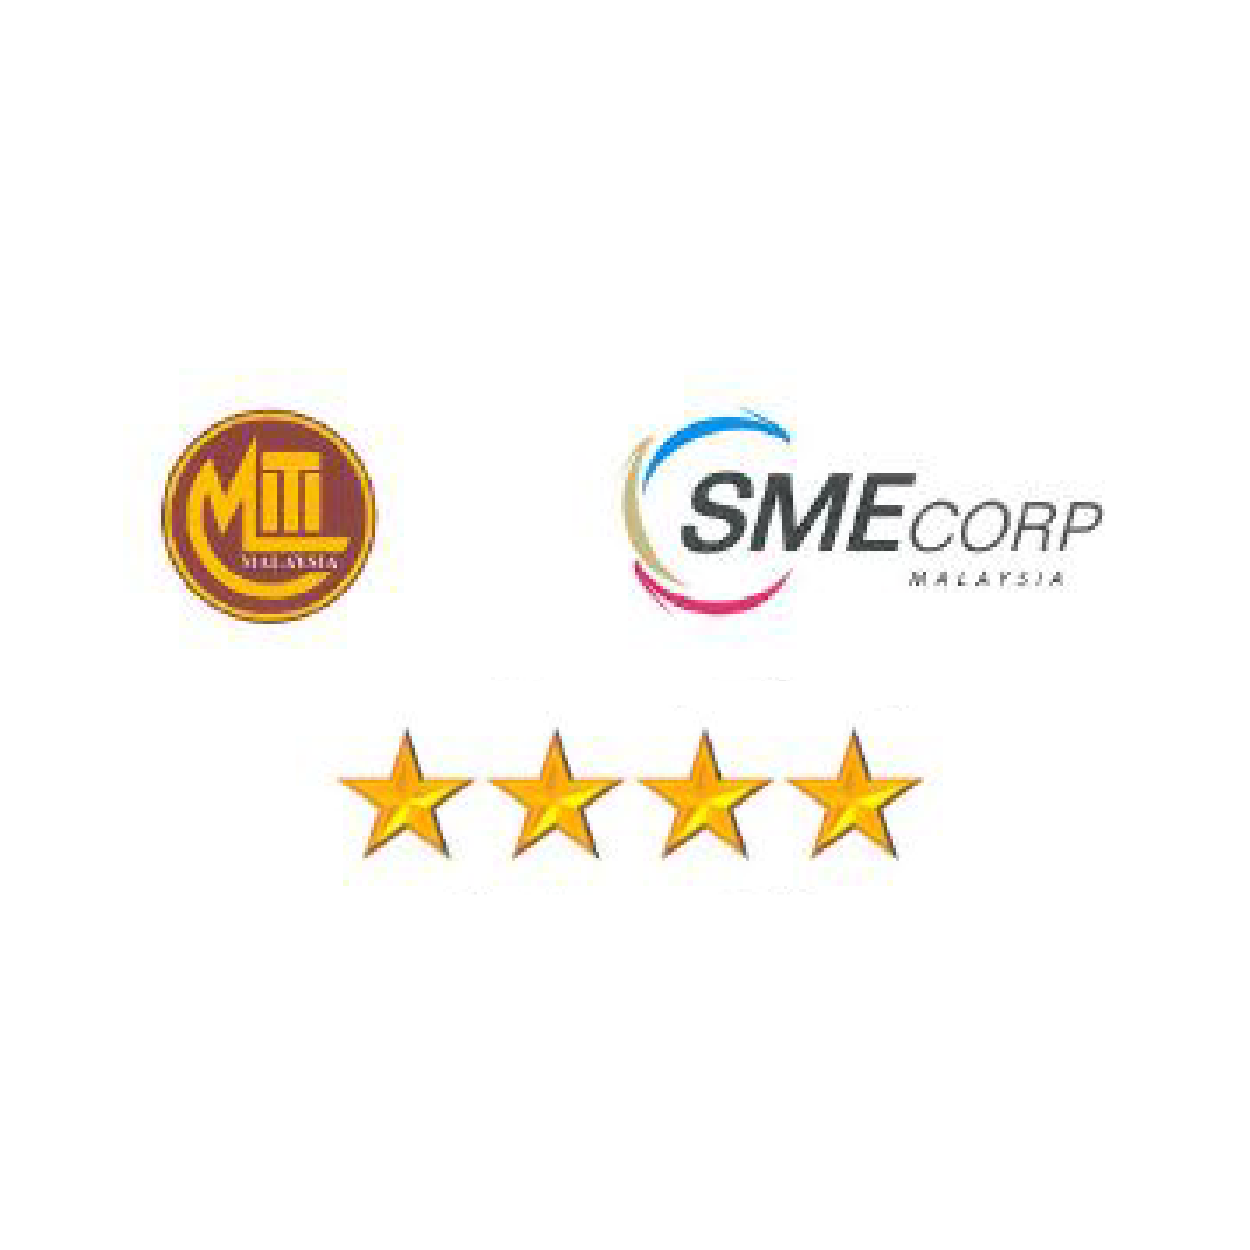 2009 - SME Competitive Rating for Enhancement - 4 Star Rating by MITI and SME Corp